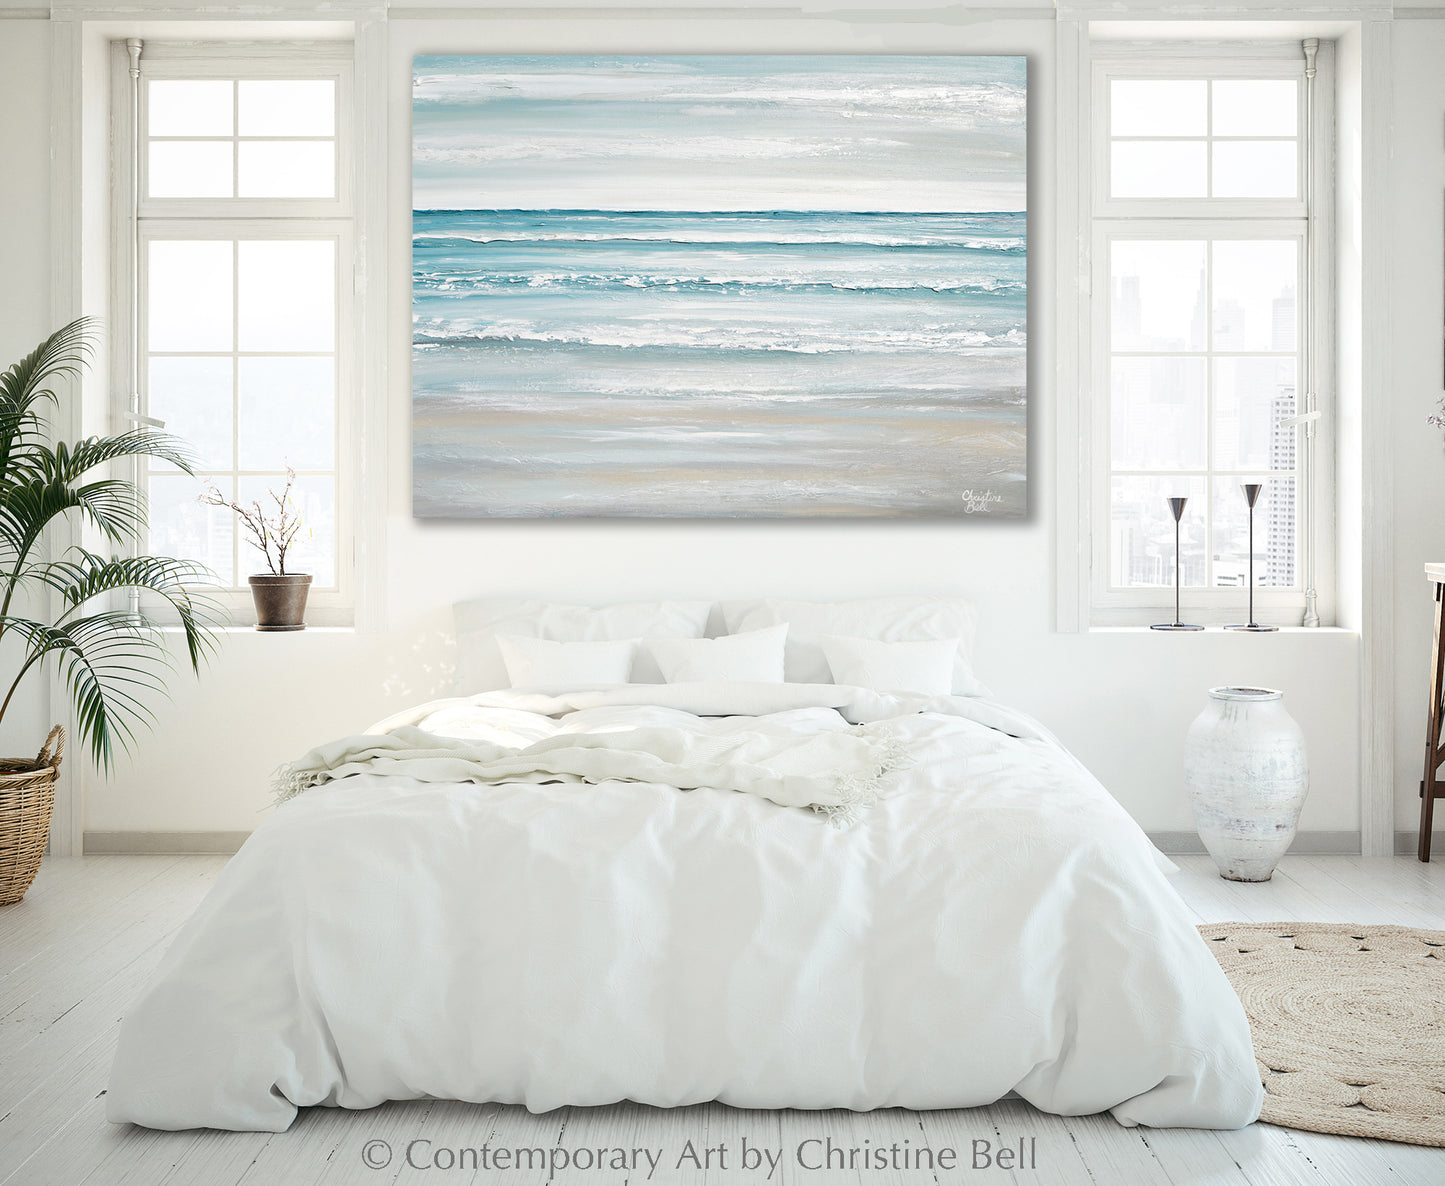 "A Place of Solitude" ORIGINAL Textured Seascape Painting 40x30"